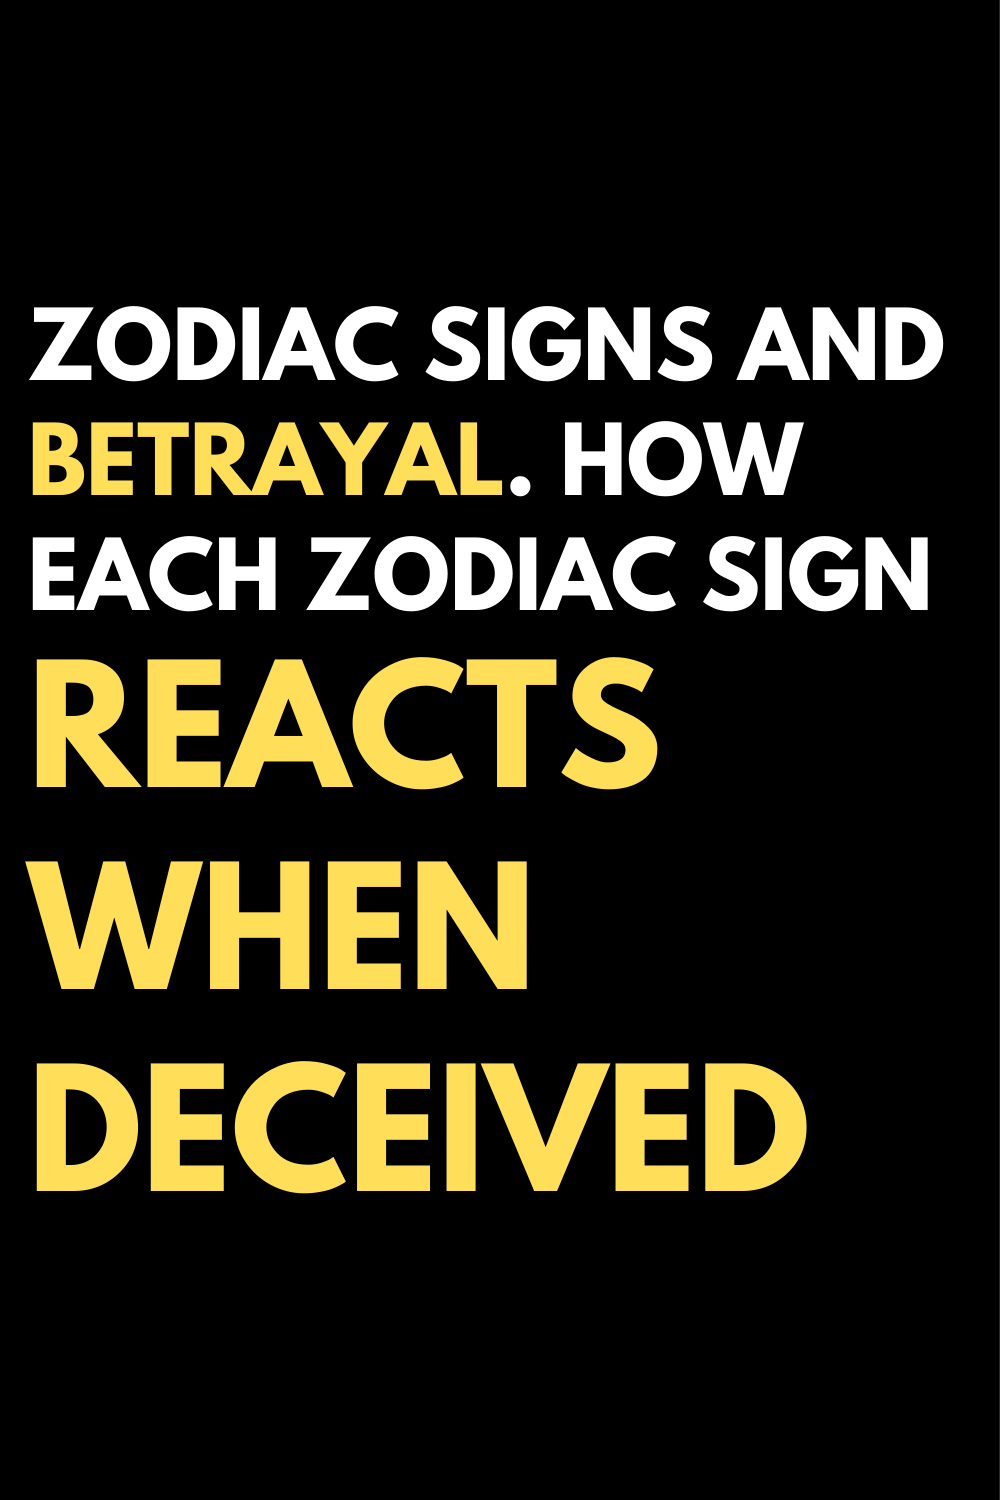 Zodiac signs and betrayal. How each zodiac sign reacts when deceived